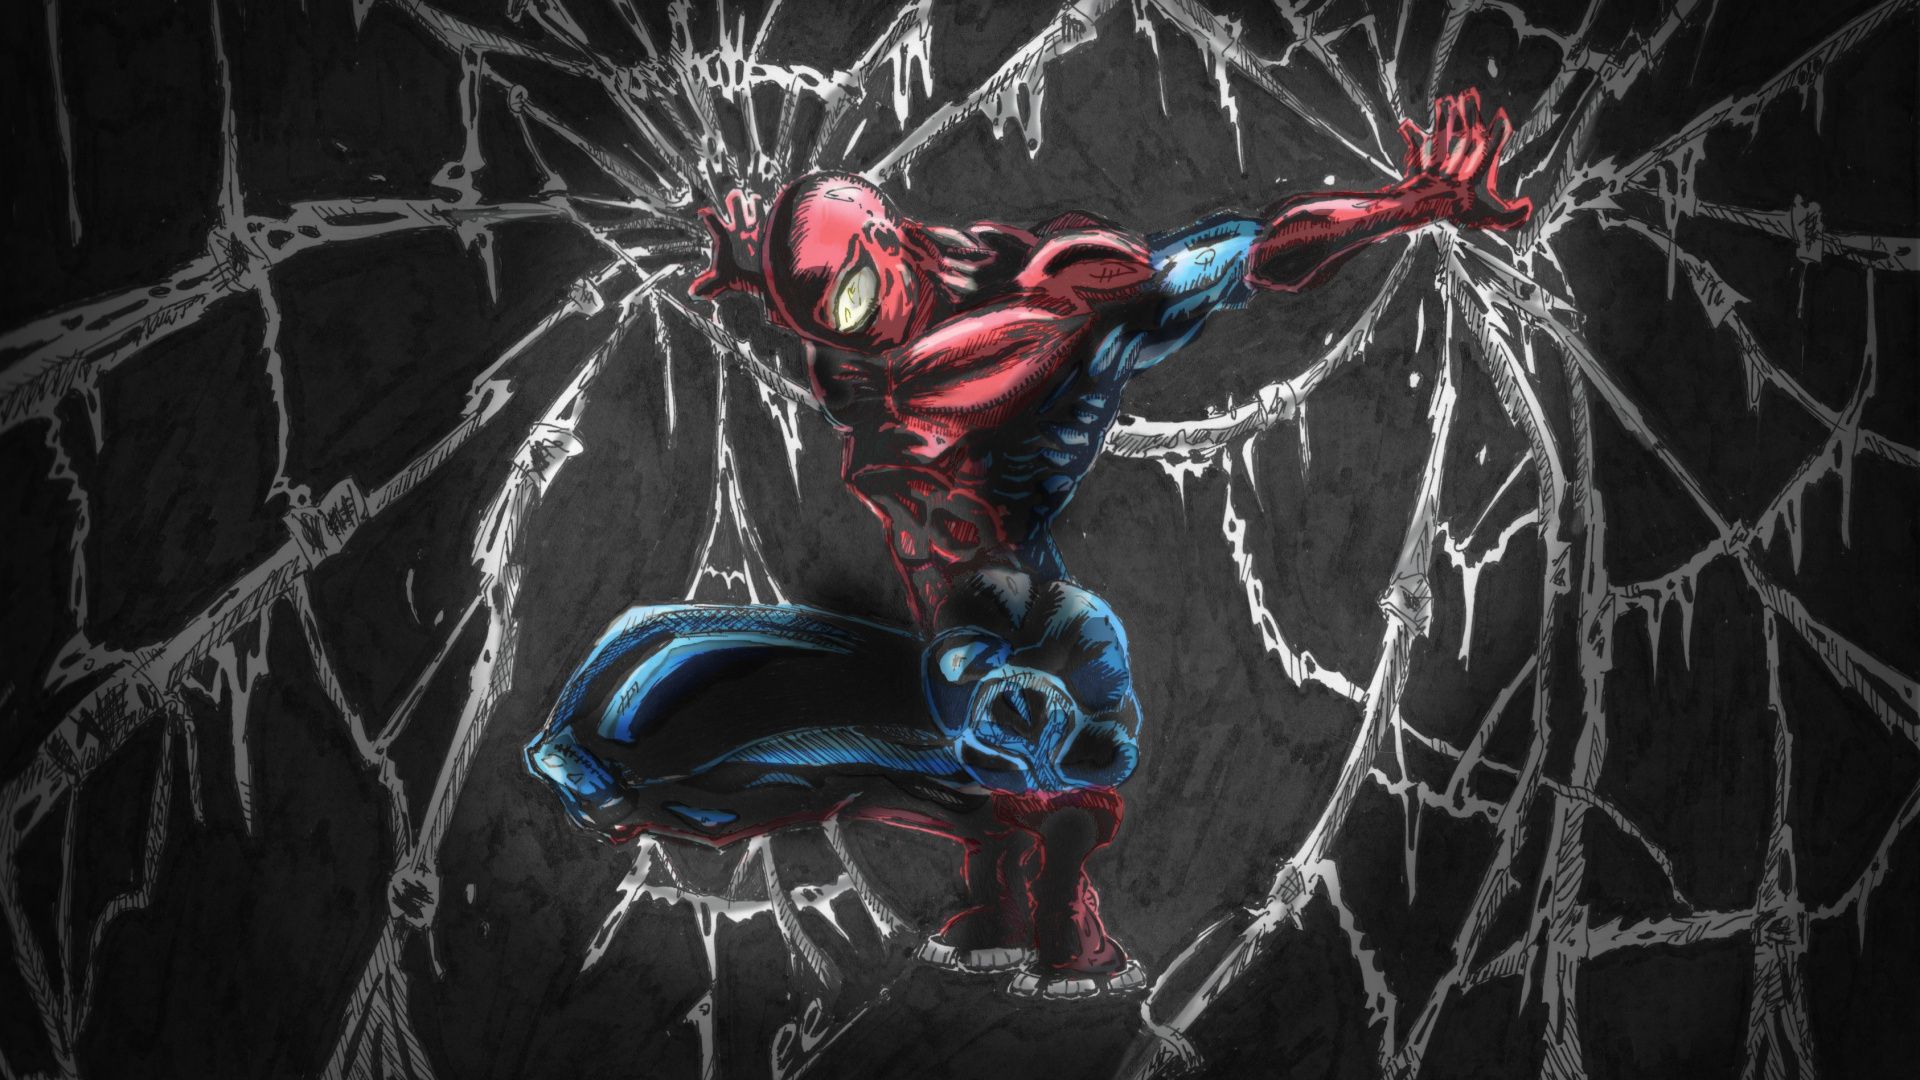 Spider-Man In The Web Digital Art Wallpapers